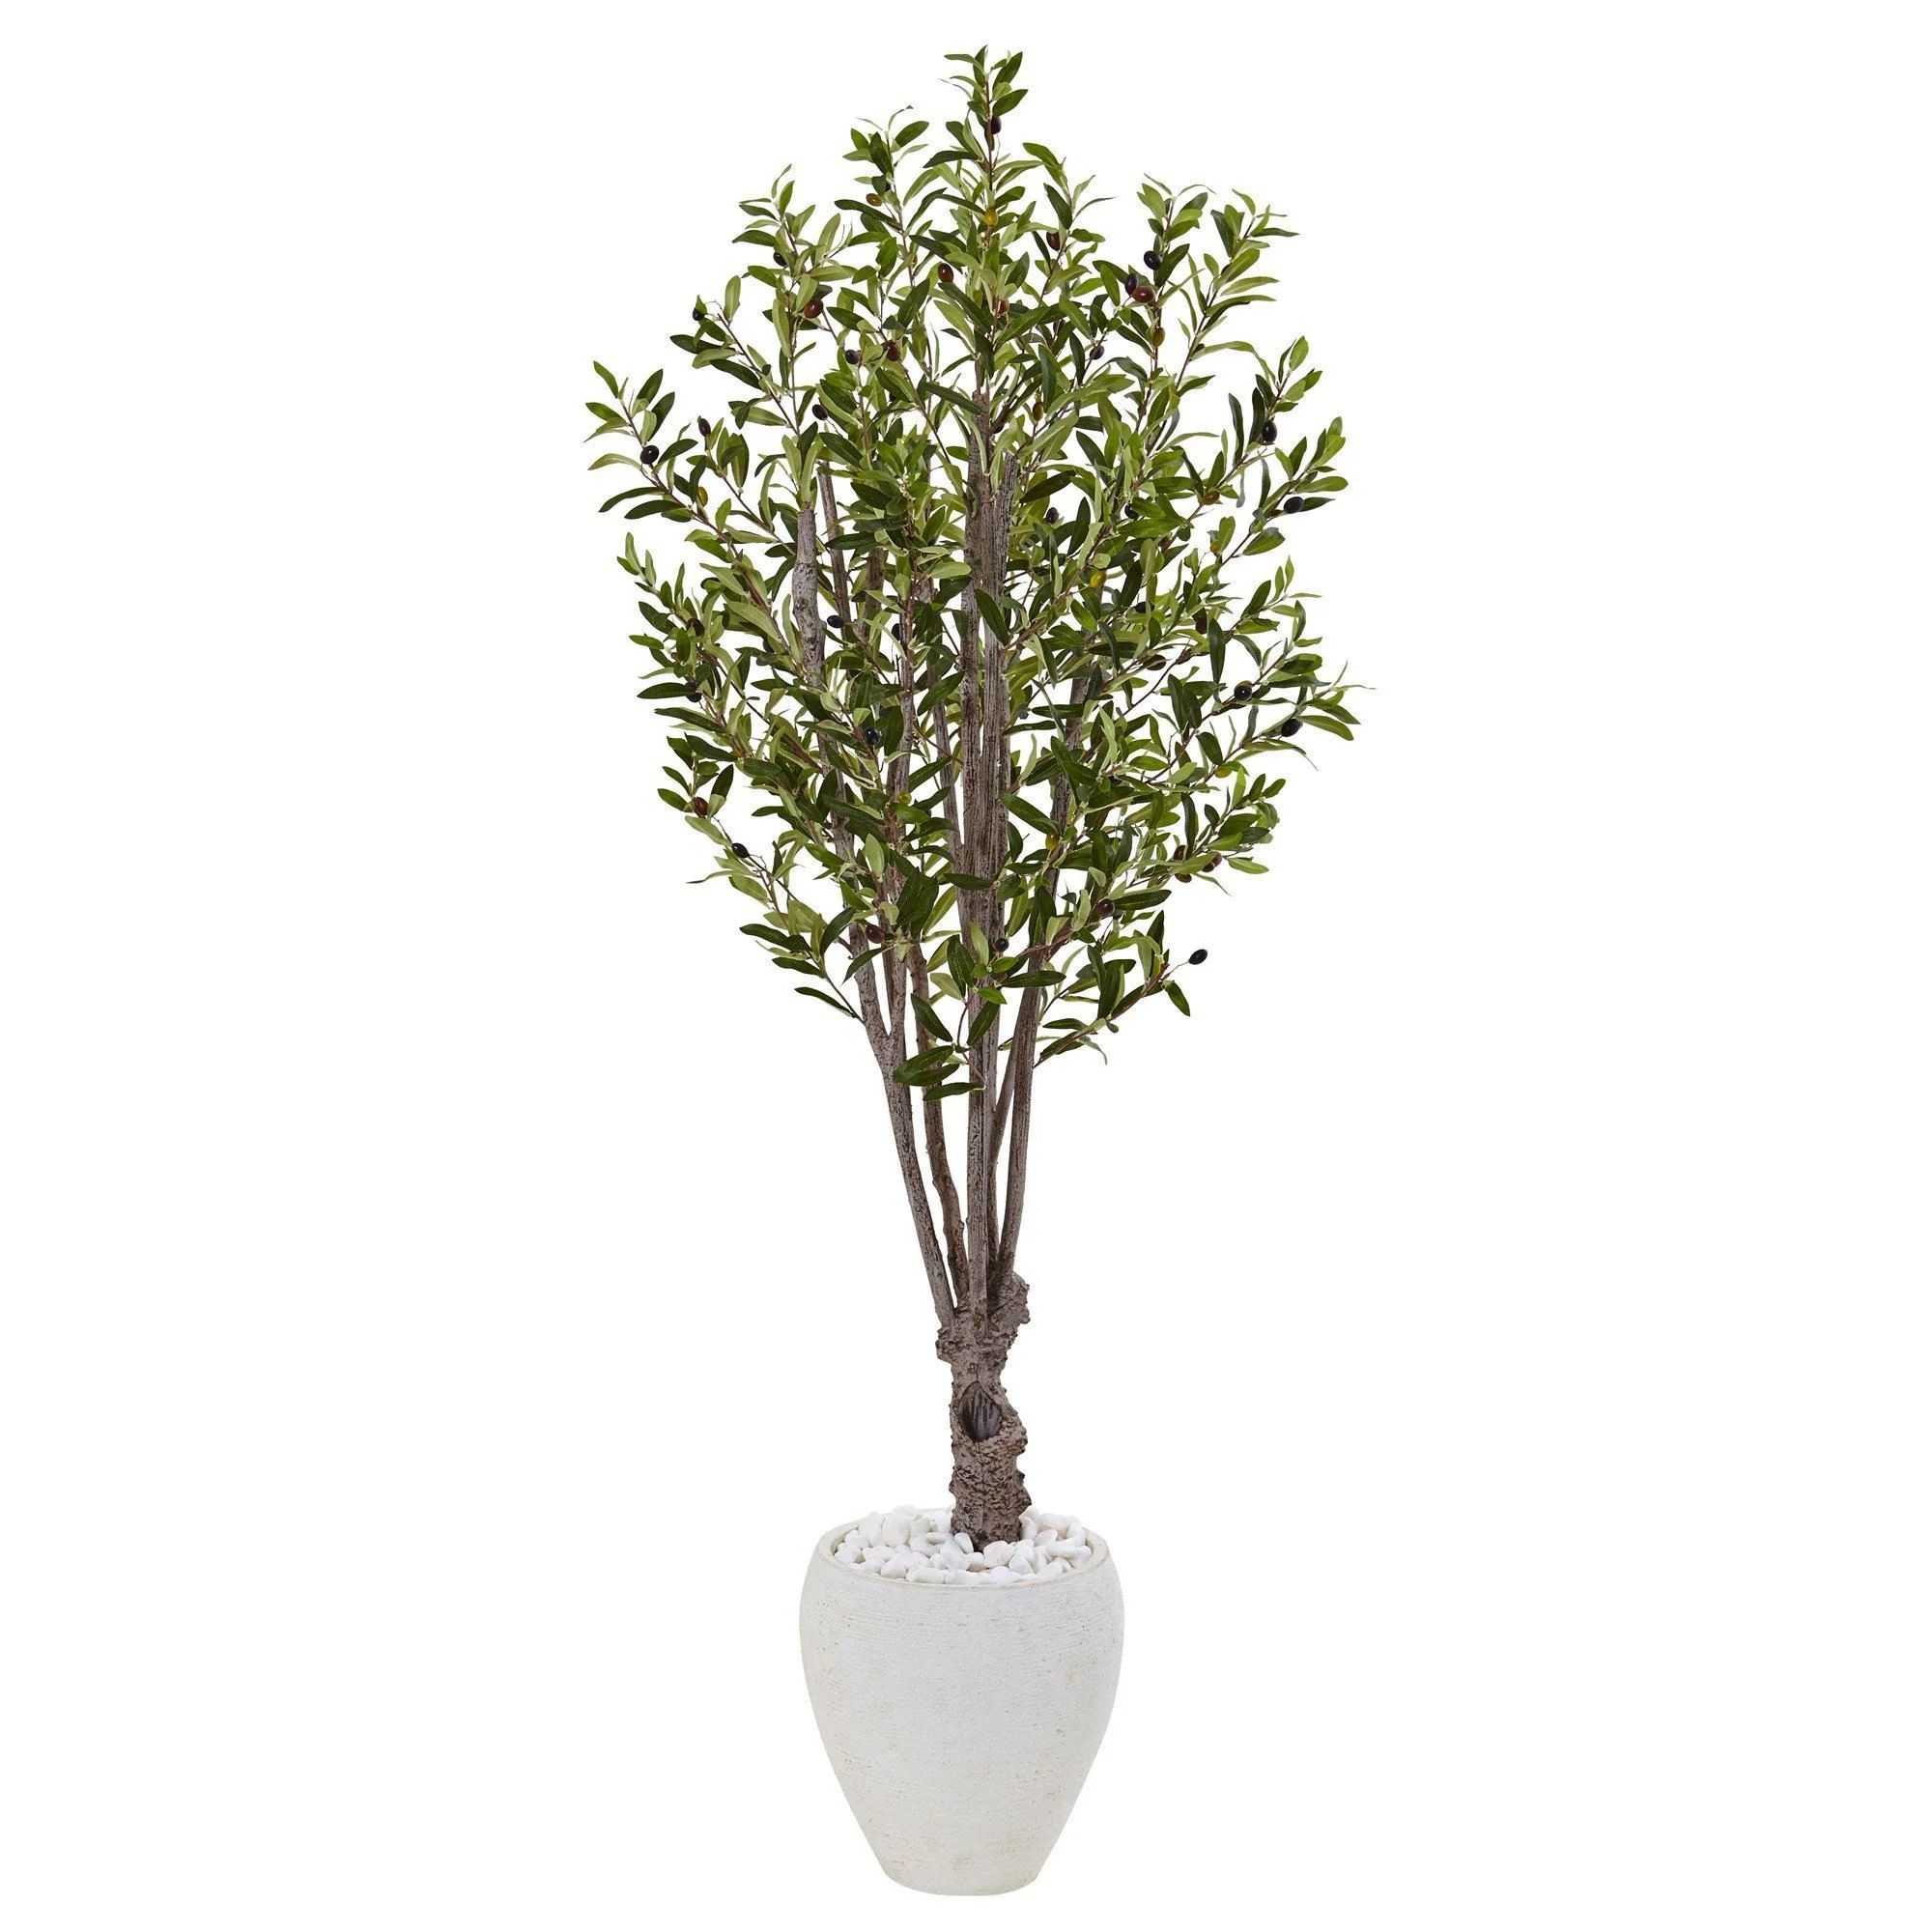 5’ Olive Tree in White Oval Planter | Nearly Natural